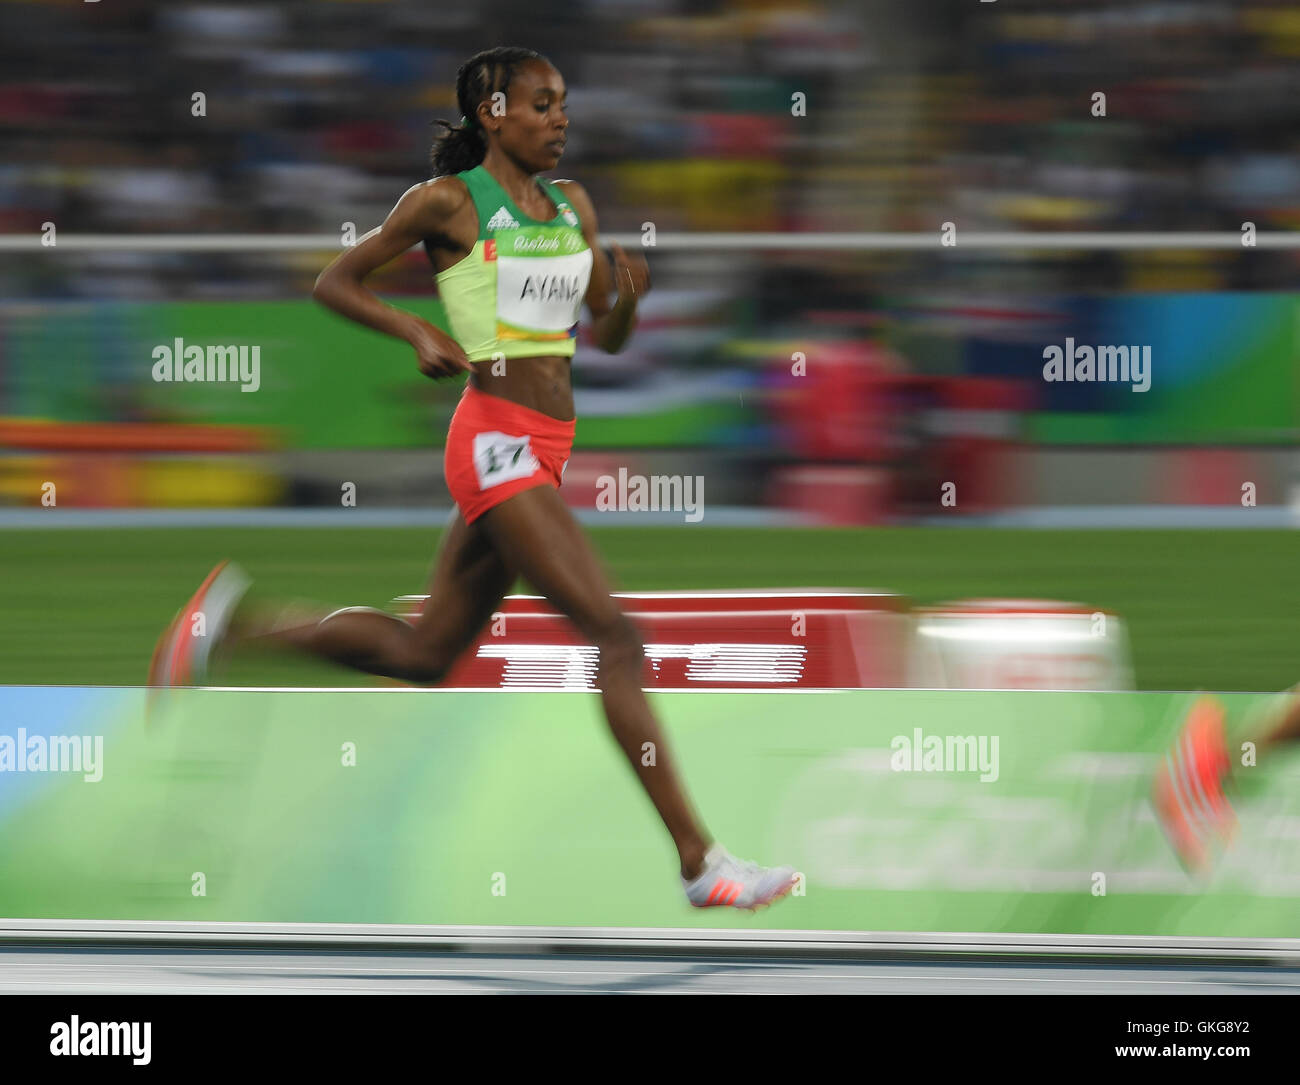 Rio de Janeiro, Brazil. 19th August, 2016. Alma Ayana of Ethiopia in the final of the women's 5000m during the (EVENT) on Day 14 Athletics of the 2016 Rio Olympics at Olympic Stadium on August 19, 2016 in Rio de Janeiro, Brazil. Credit:  Roger Sedres/Alamy Live News Stock Photo